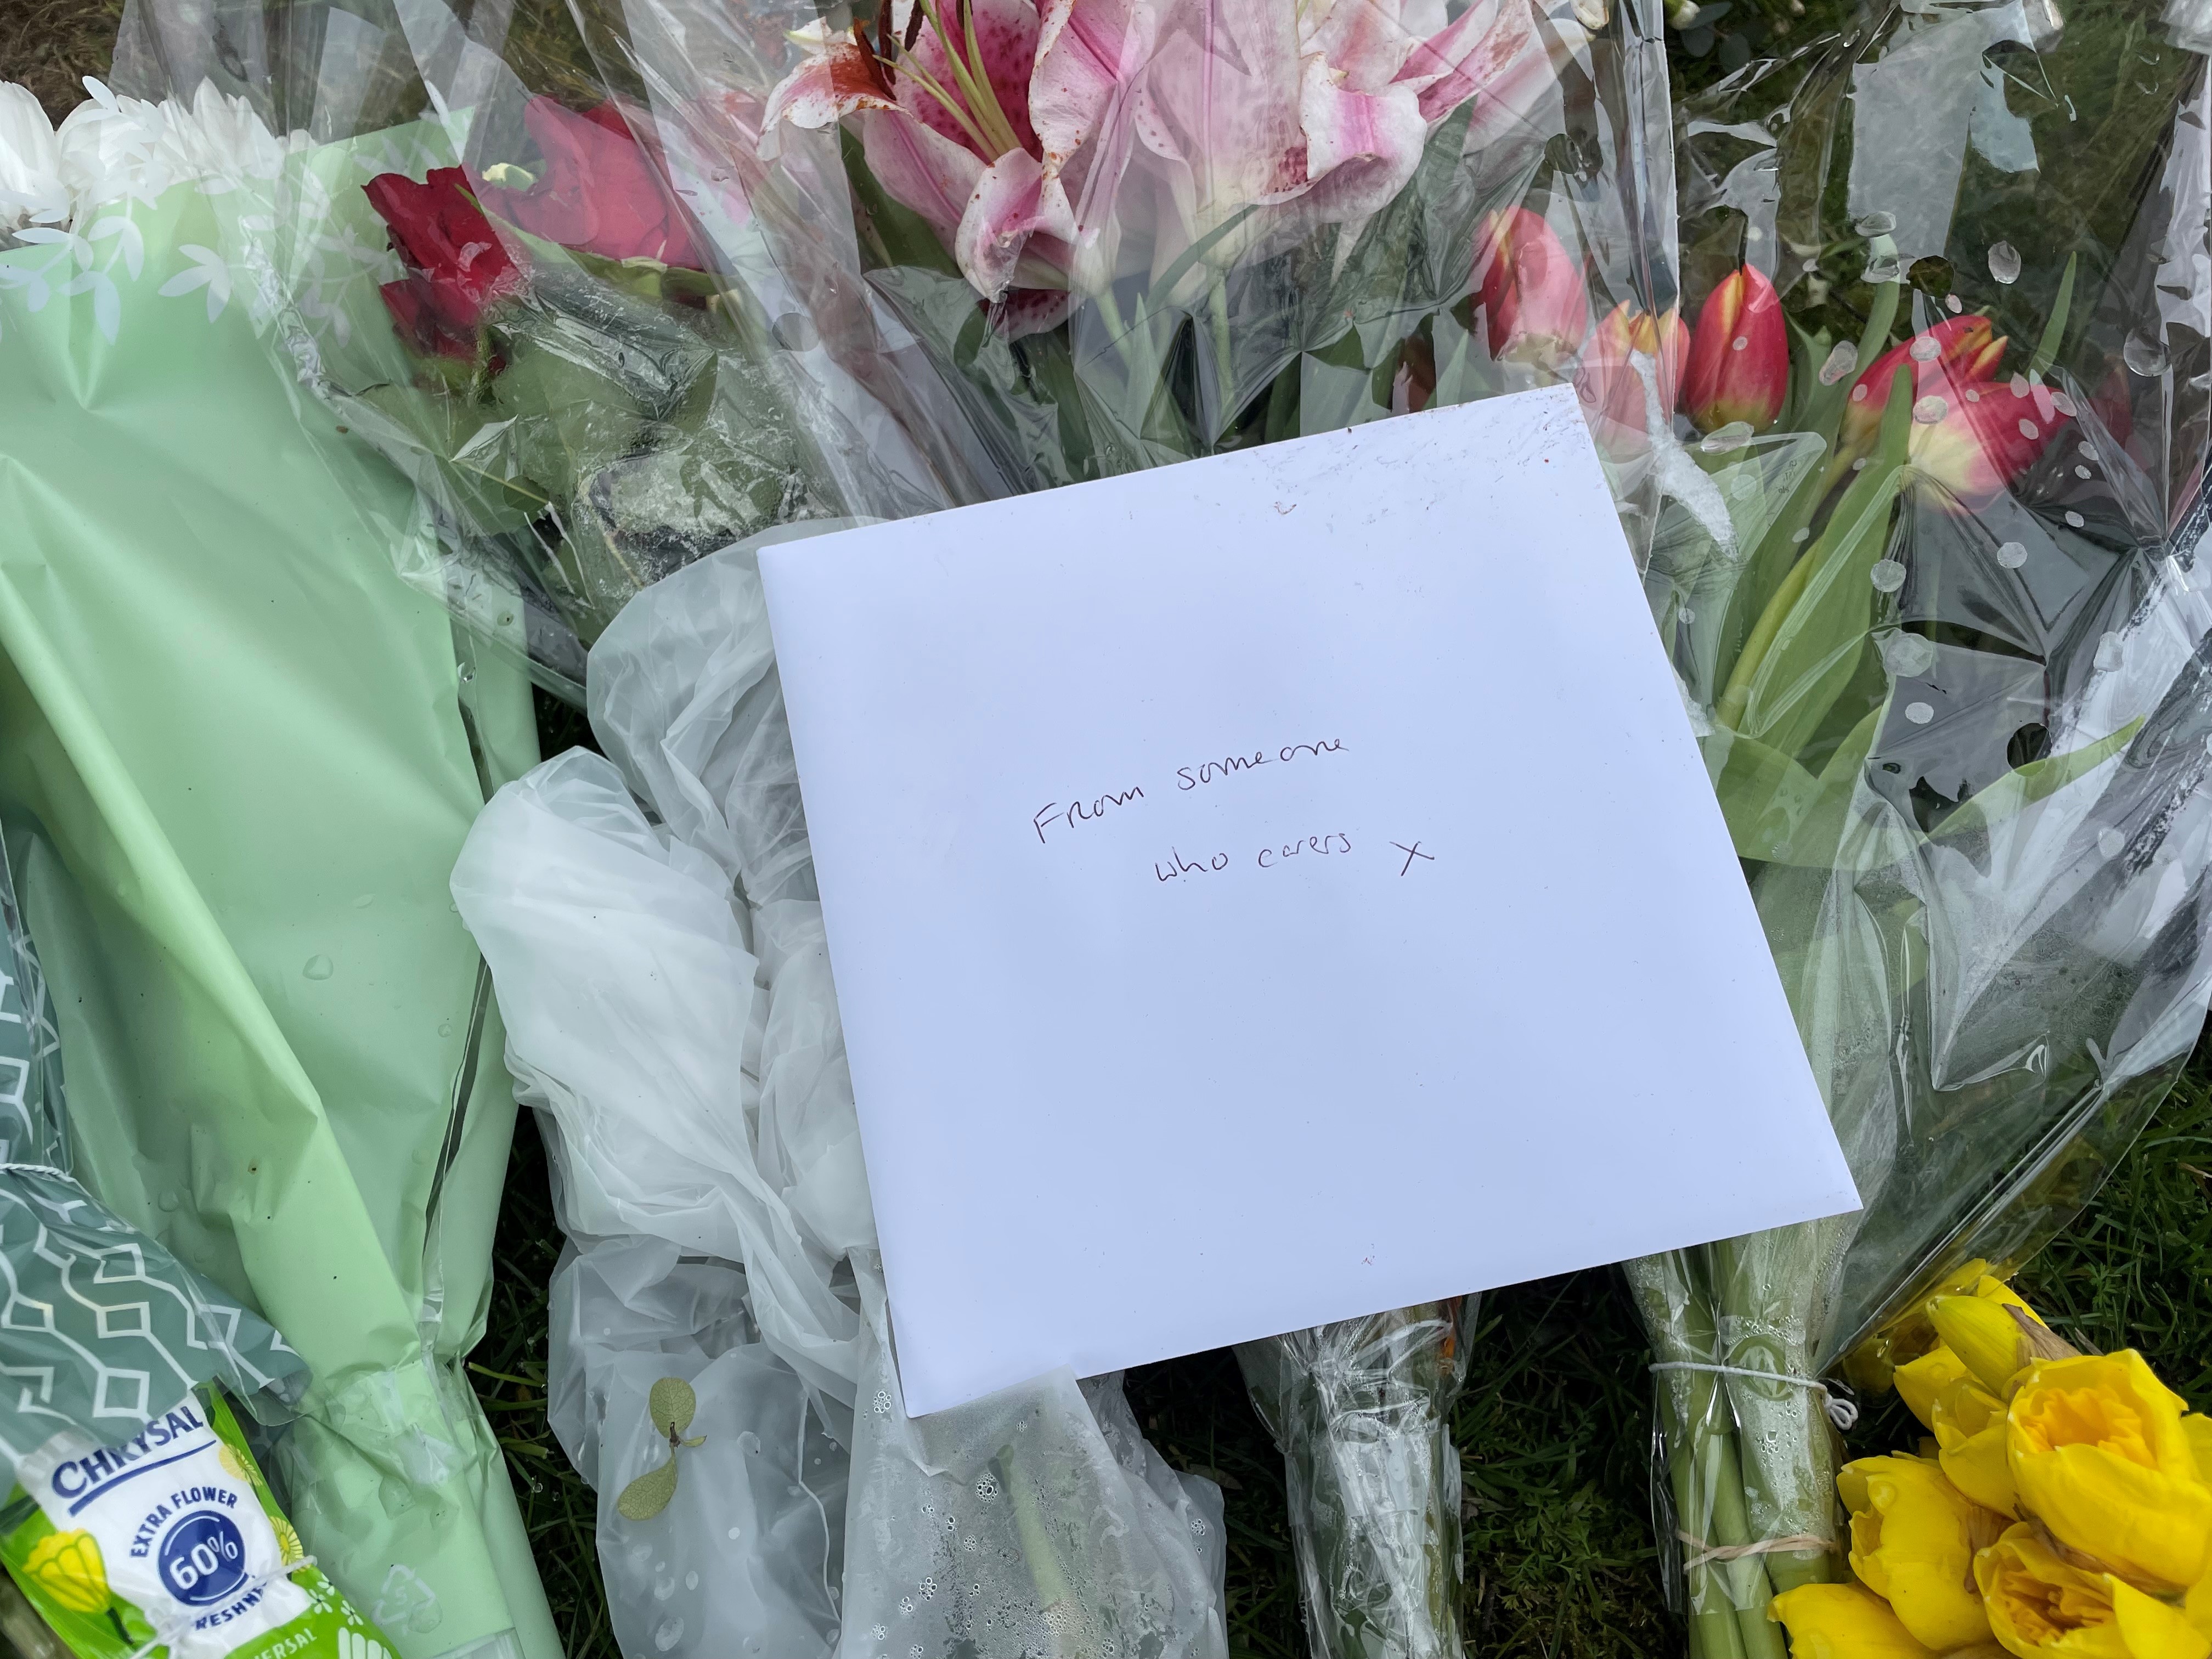 Floral tributes in Grayson Avenue, Pakefield, Suffolk remains sealed off as police investigate the murder of pensioner Joy Middleditch. (Sam Russell/ PA)